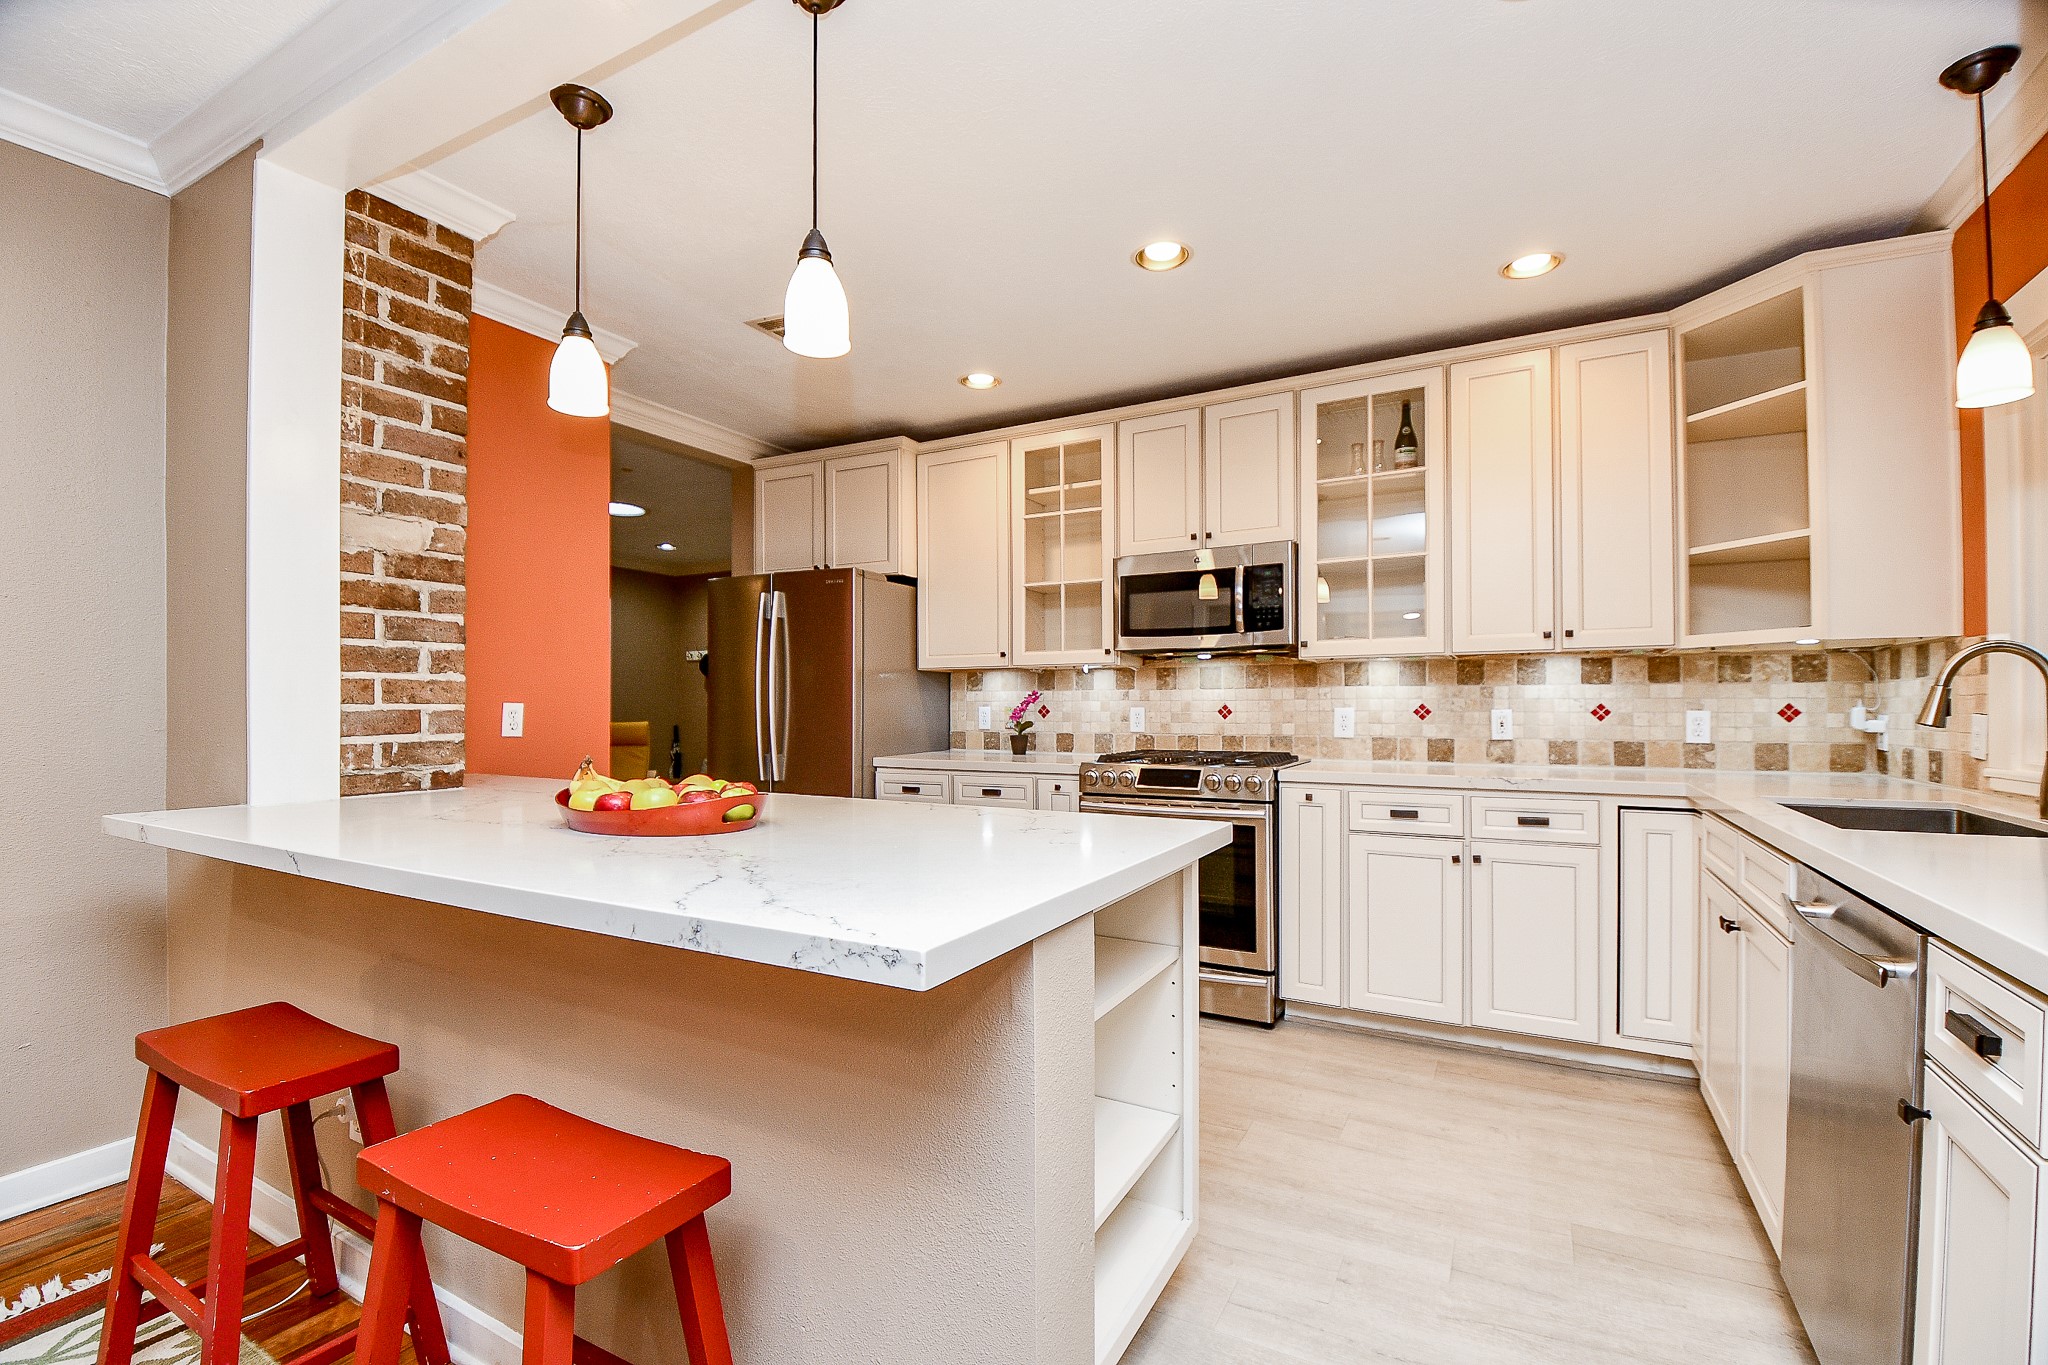 Welcome to your exquisitely remodeled kitchen.